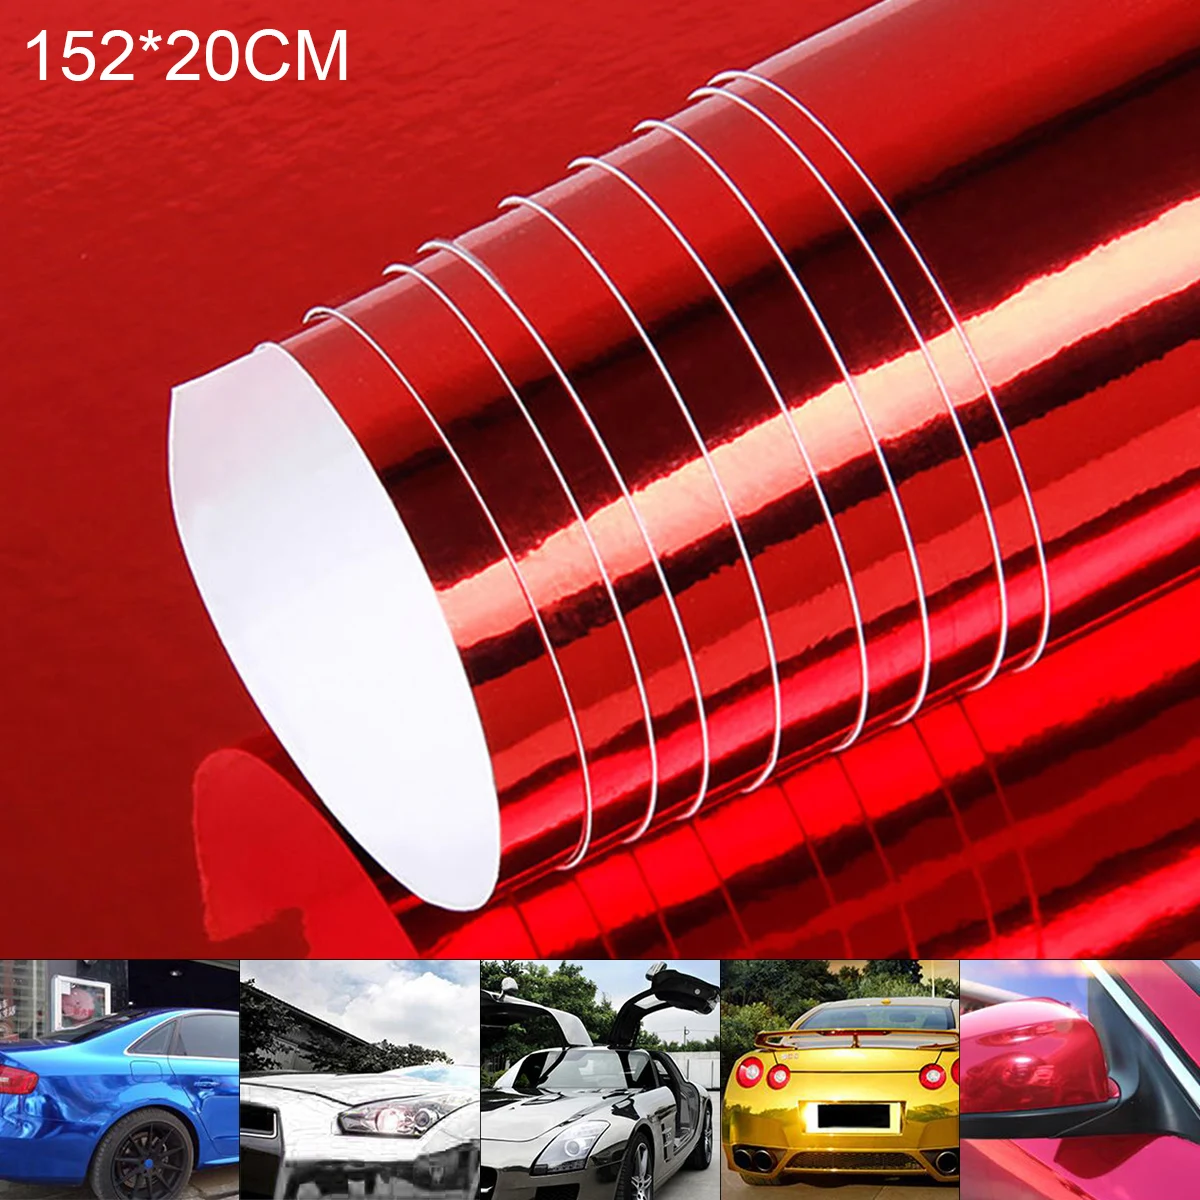 

20 x 152 CM PVC Electroplating Mirror Surface Bright Reflect-light Automobile Repacking Sticker for Car Motorcycle Motorbike